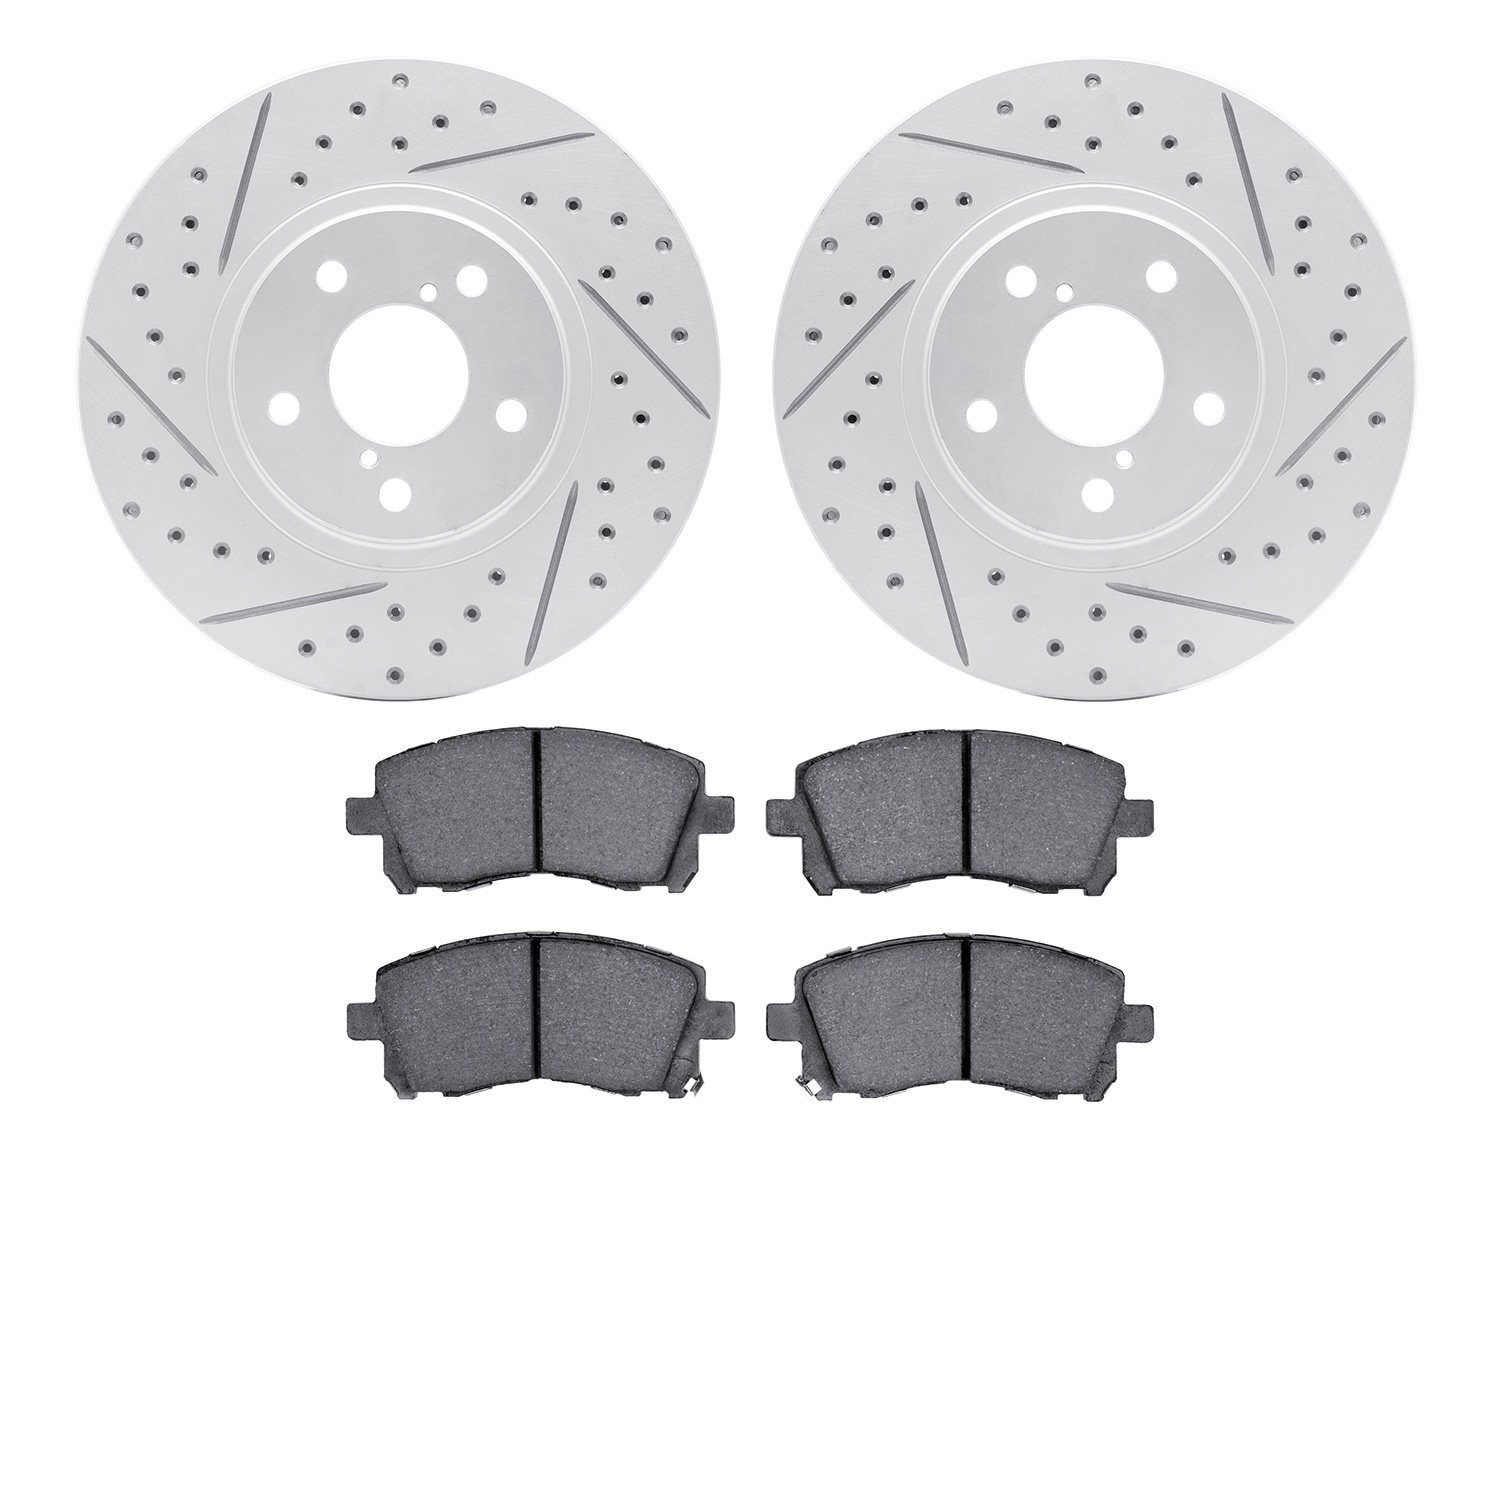 2502-13020 Geoperformance Drilled/Slotted Rotors w/5000 Advanced Brake Pads Kit, 1997-2002 Subaru, Position: Front